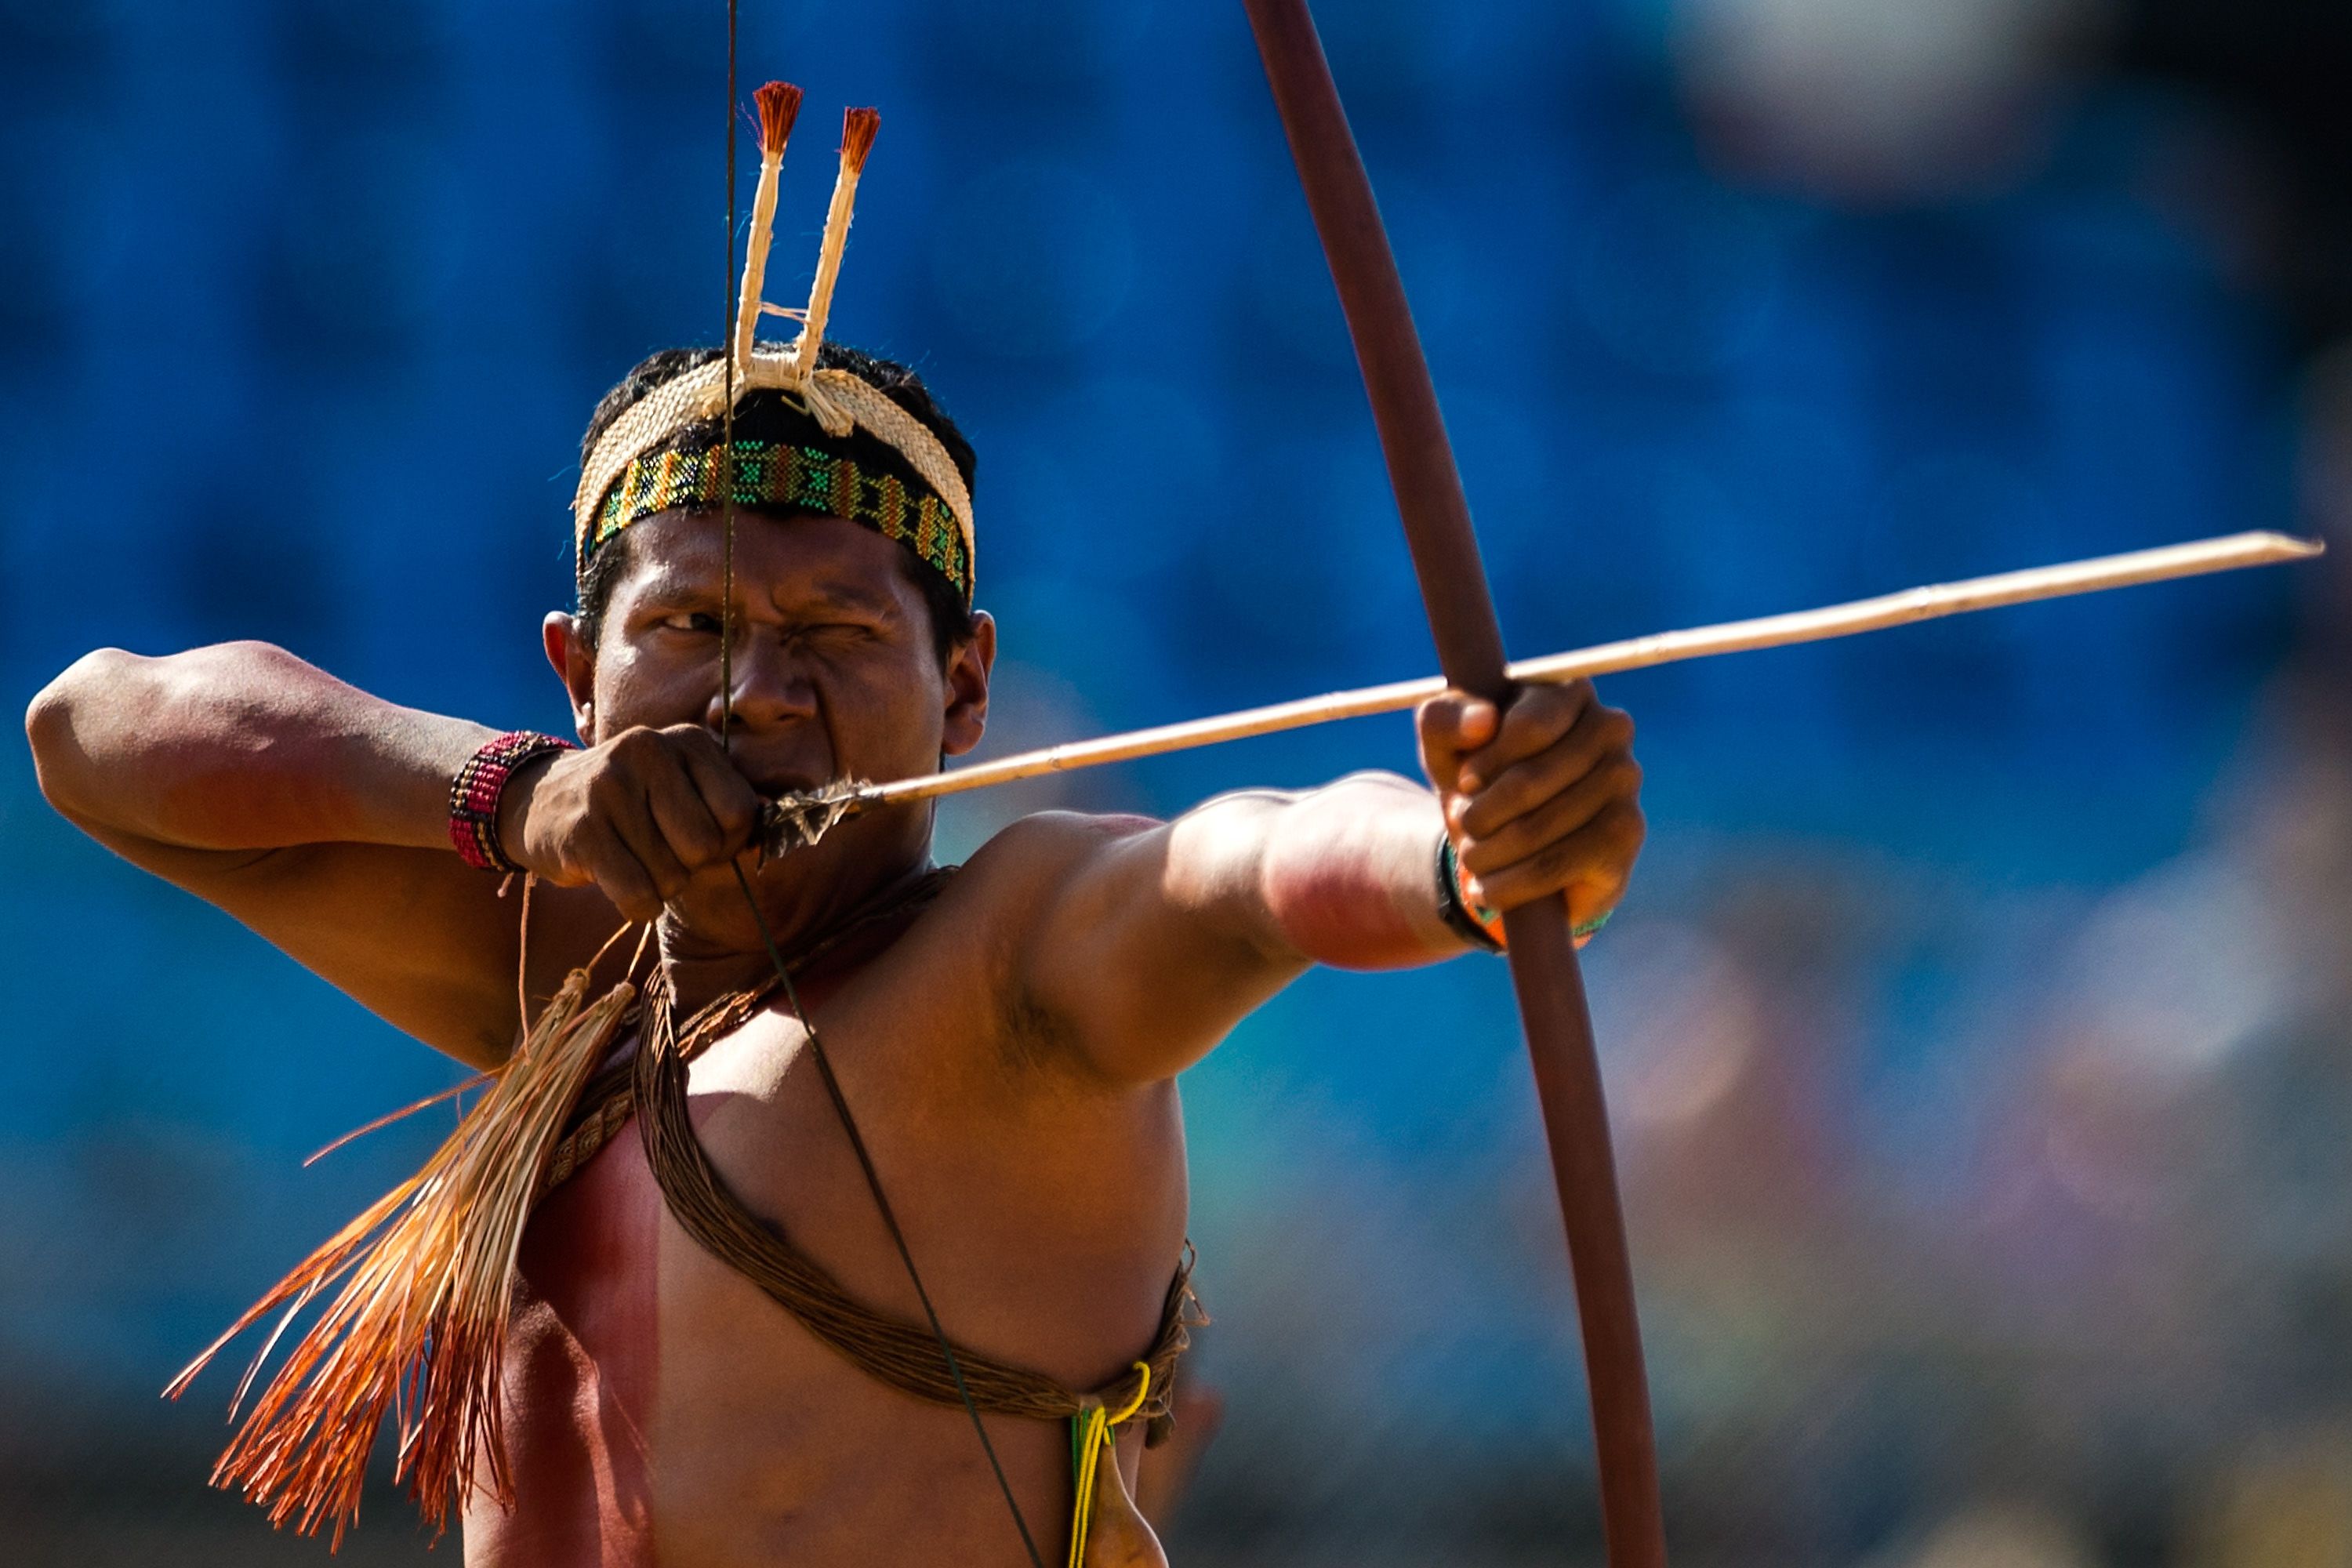 Indigenous Games show off traditional skills